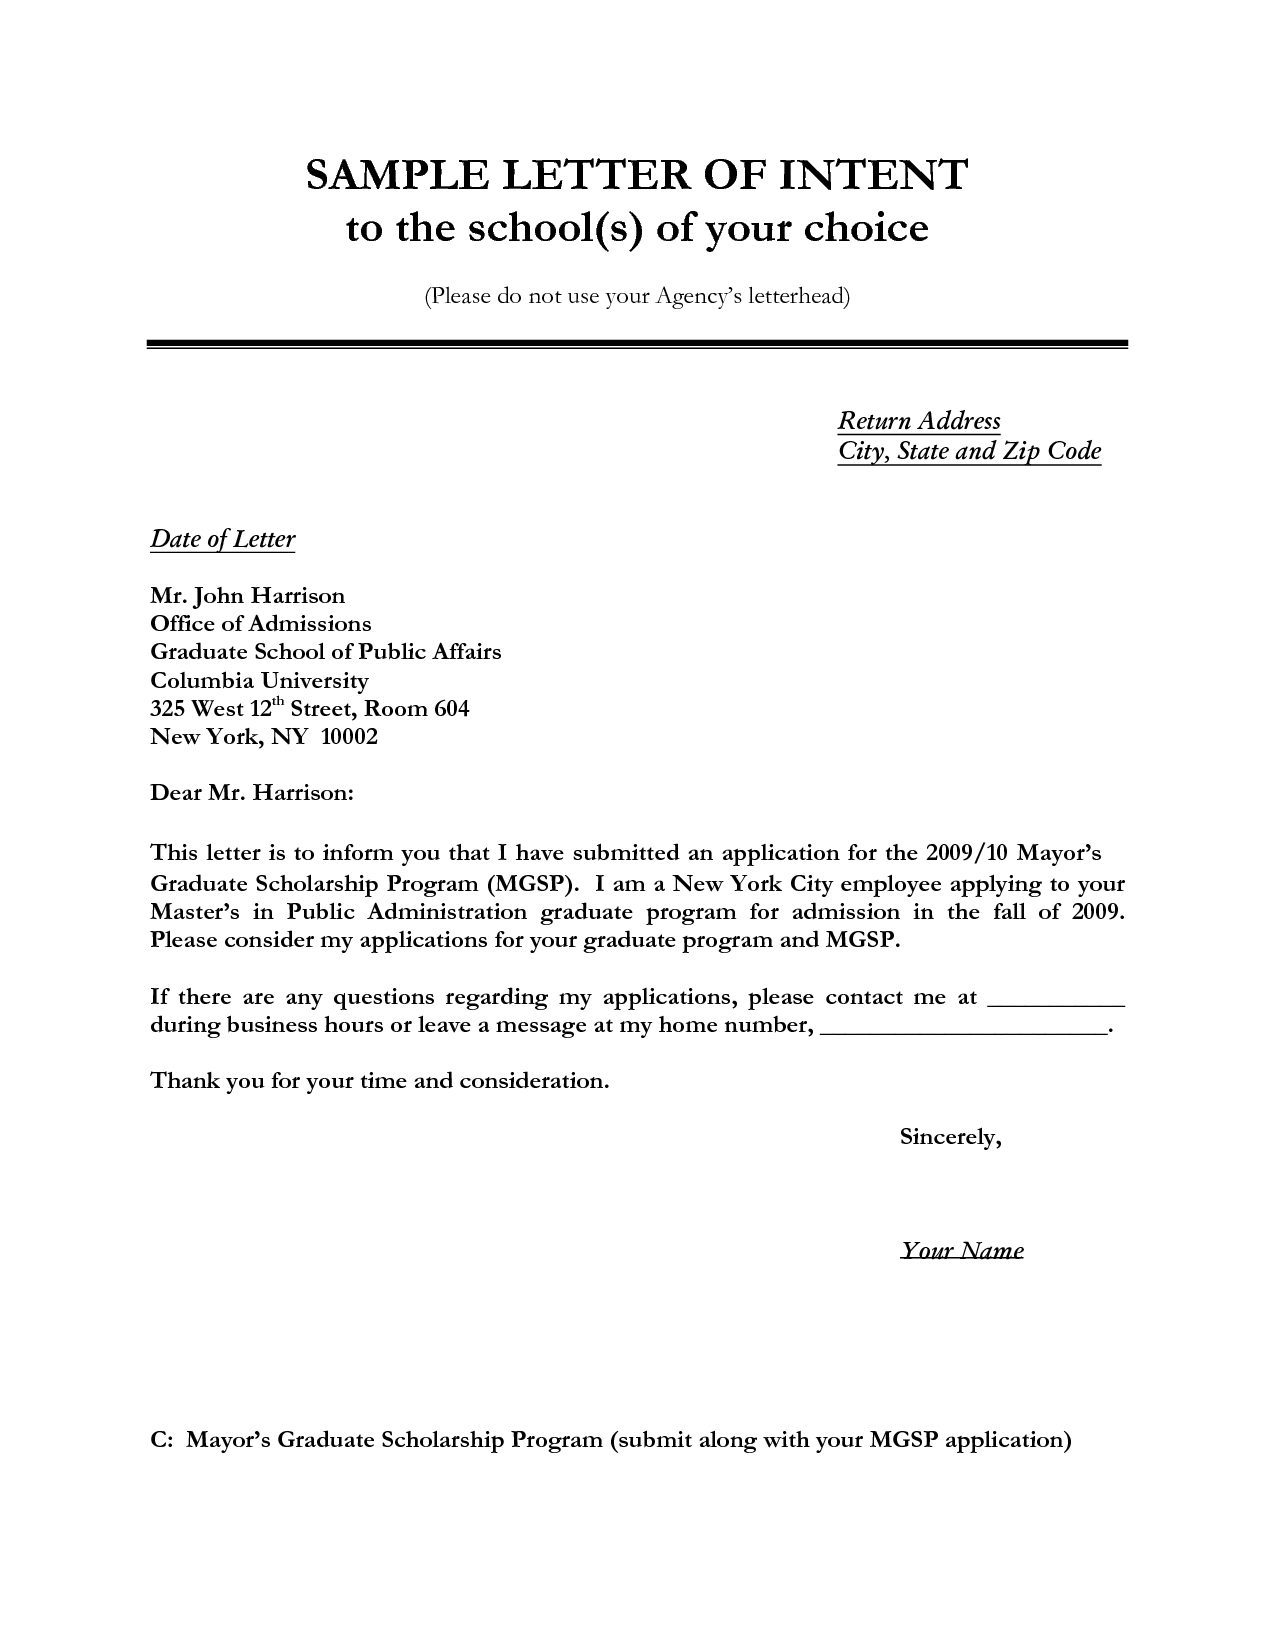 Letter Of Intent Template Business Partnership - Letter Of Intent Sample